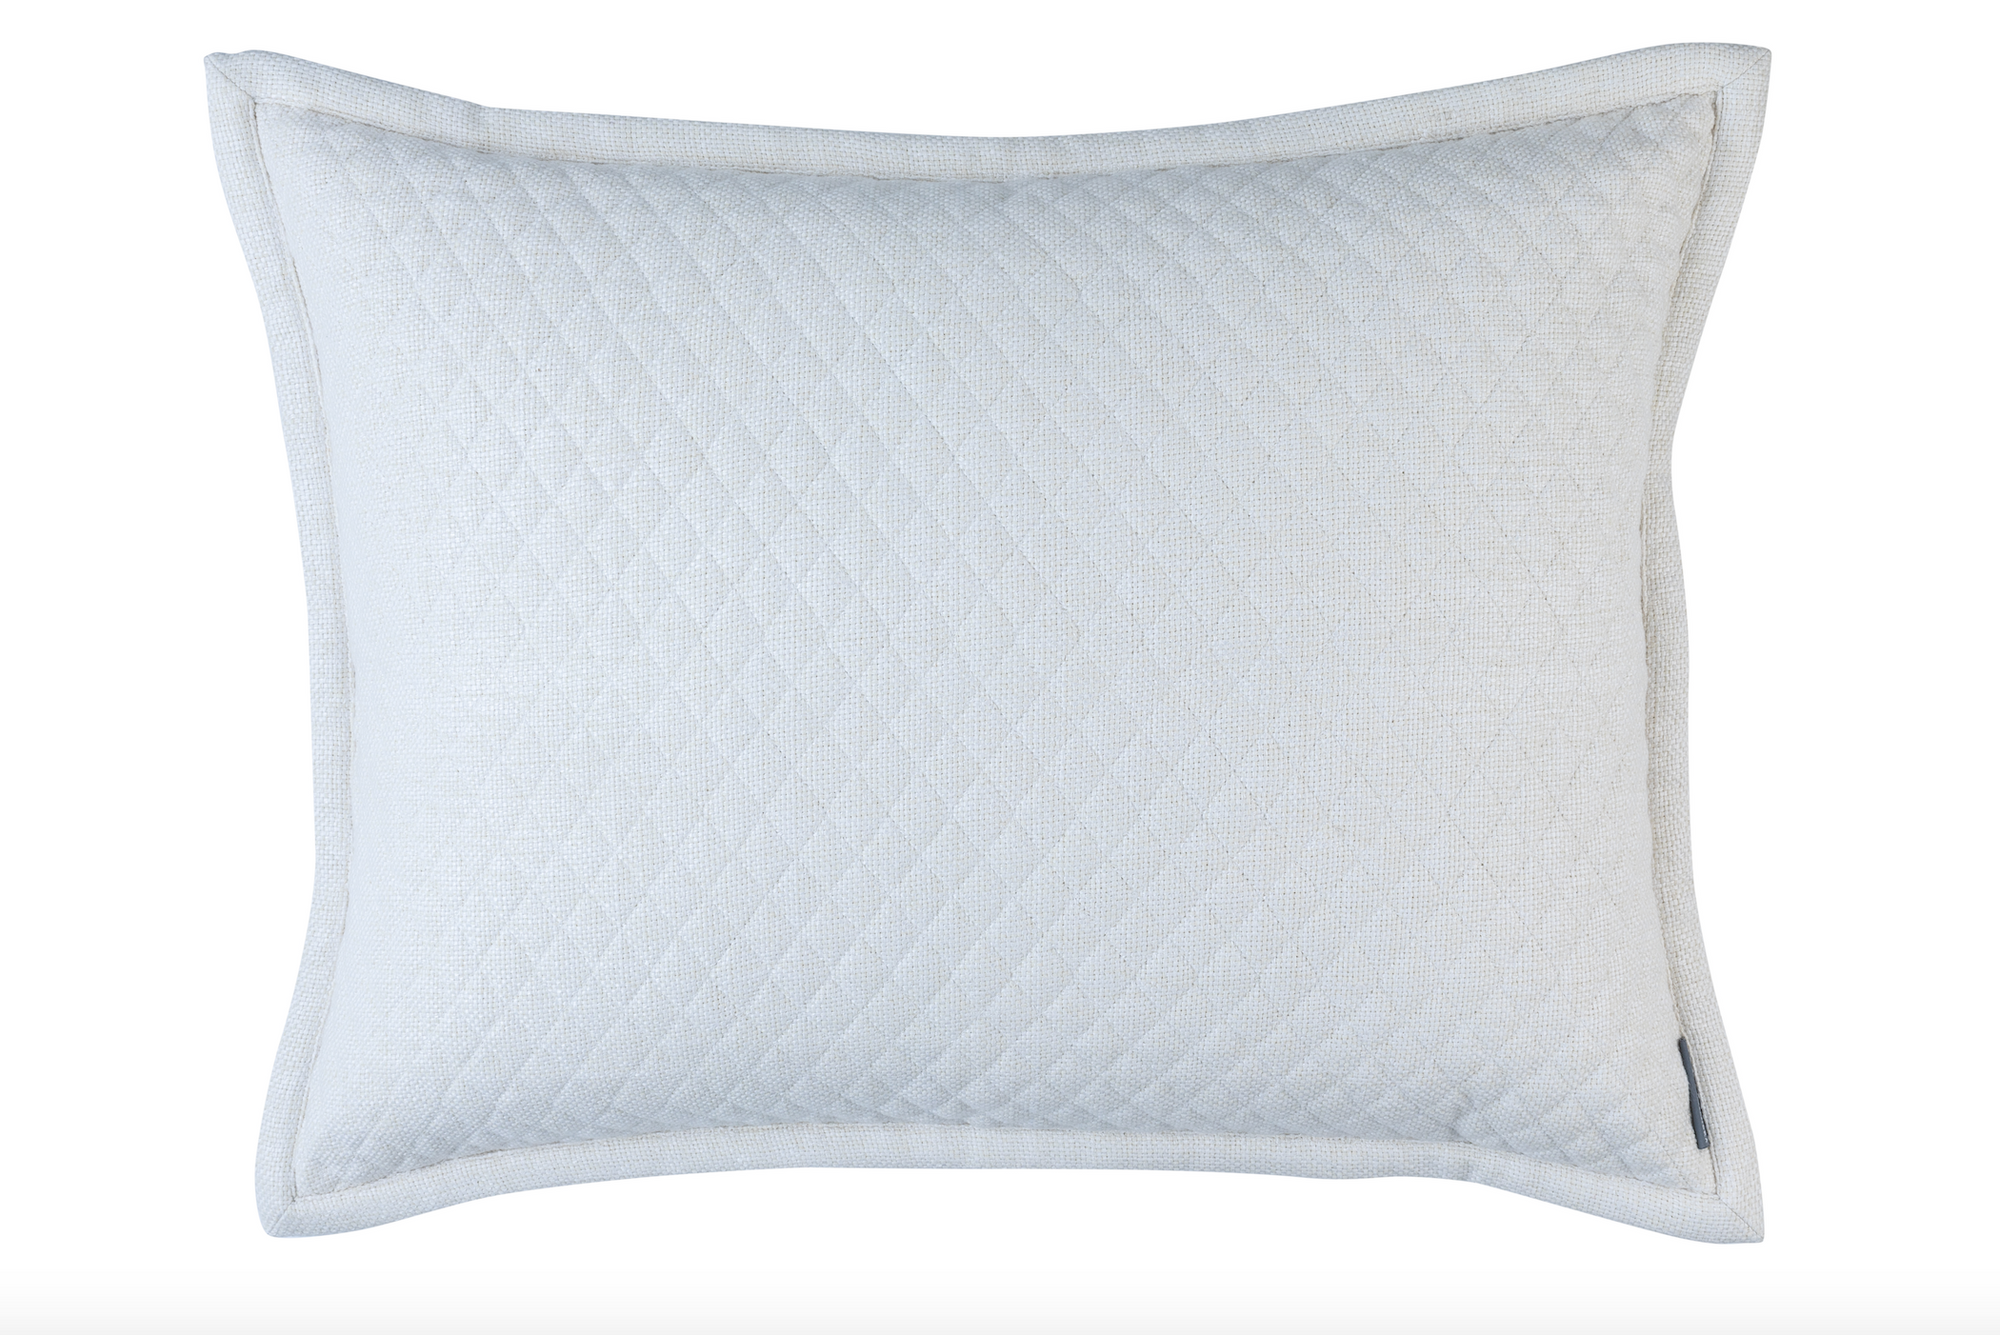 Lili Alessandra Laurie Quilted Ivory Basketweave Standard Pillow